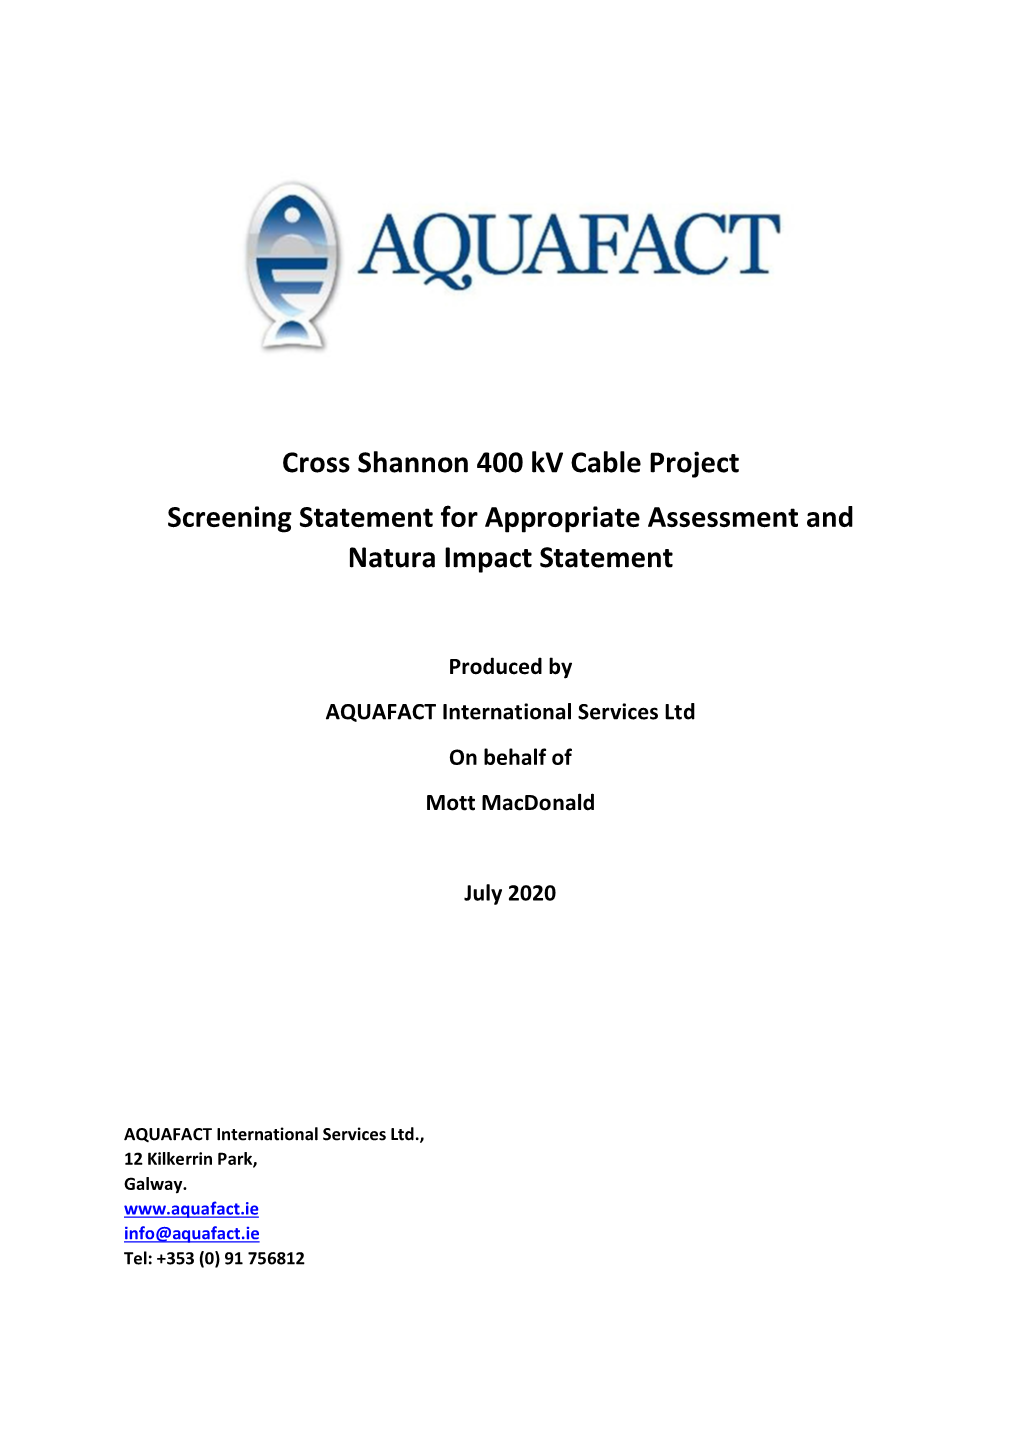 Cross Shannon 400 Kv Cable Project Screening Statement for Appropriate Assessment and Natura Impact Statement